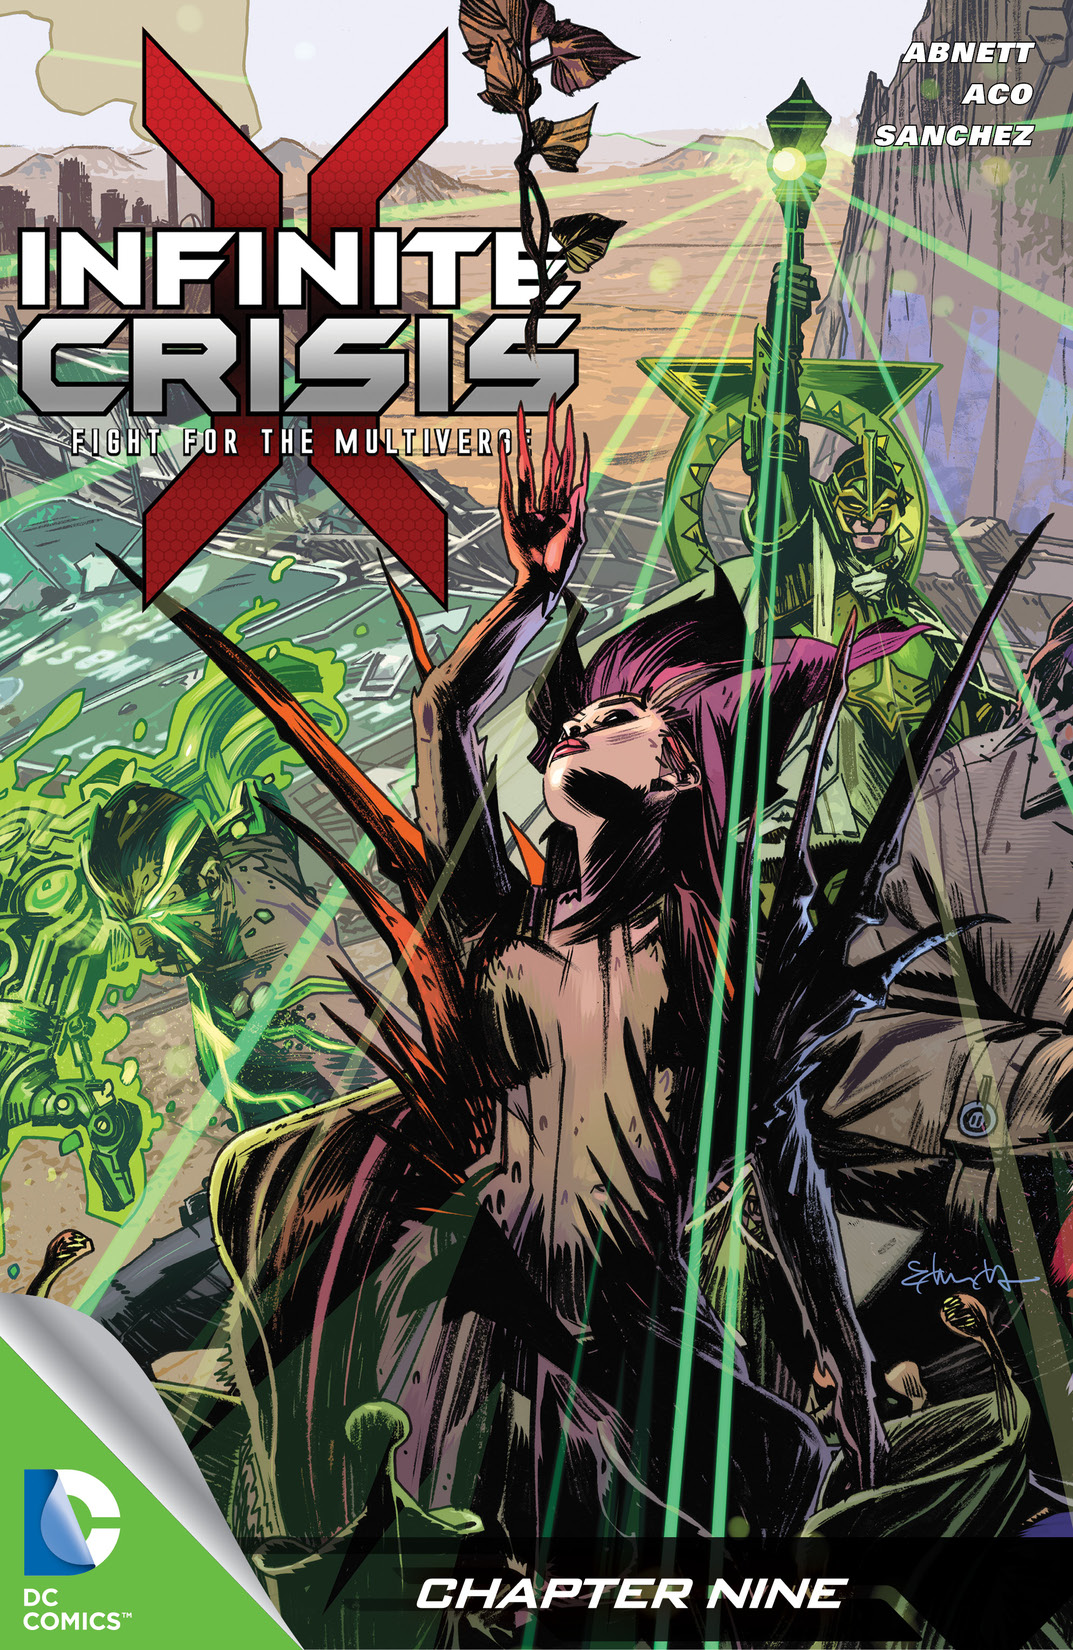 Infinite Crisis: Fight for the Multiverse #9 preview images